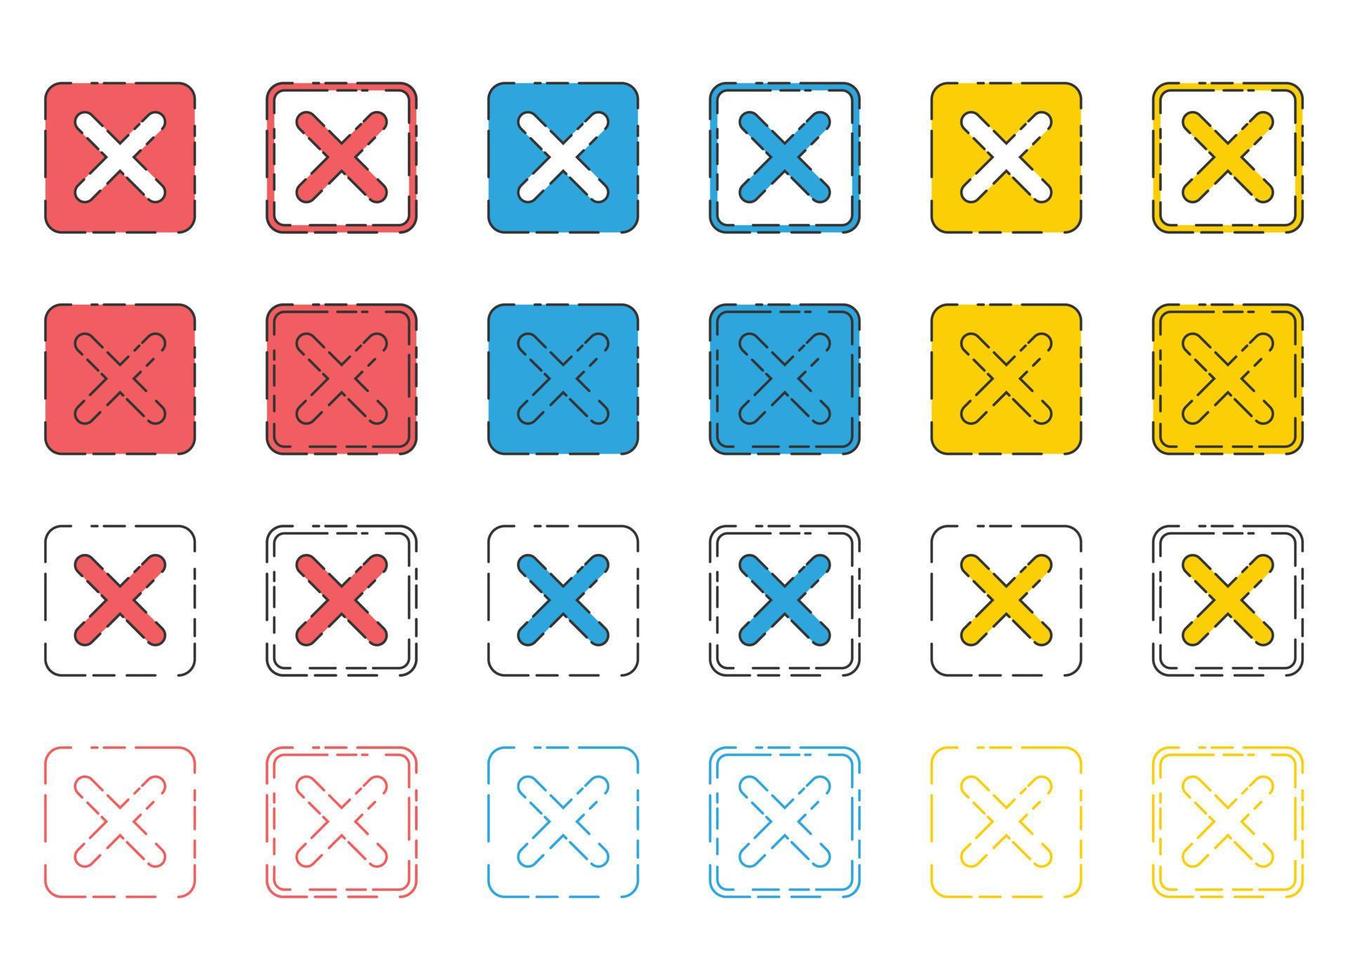 Rejected cross mark icon in flat style vector collection